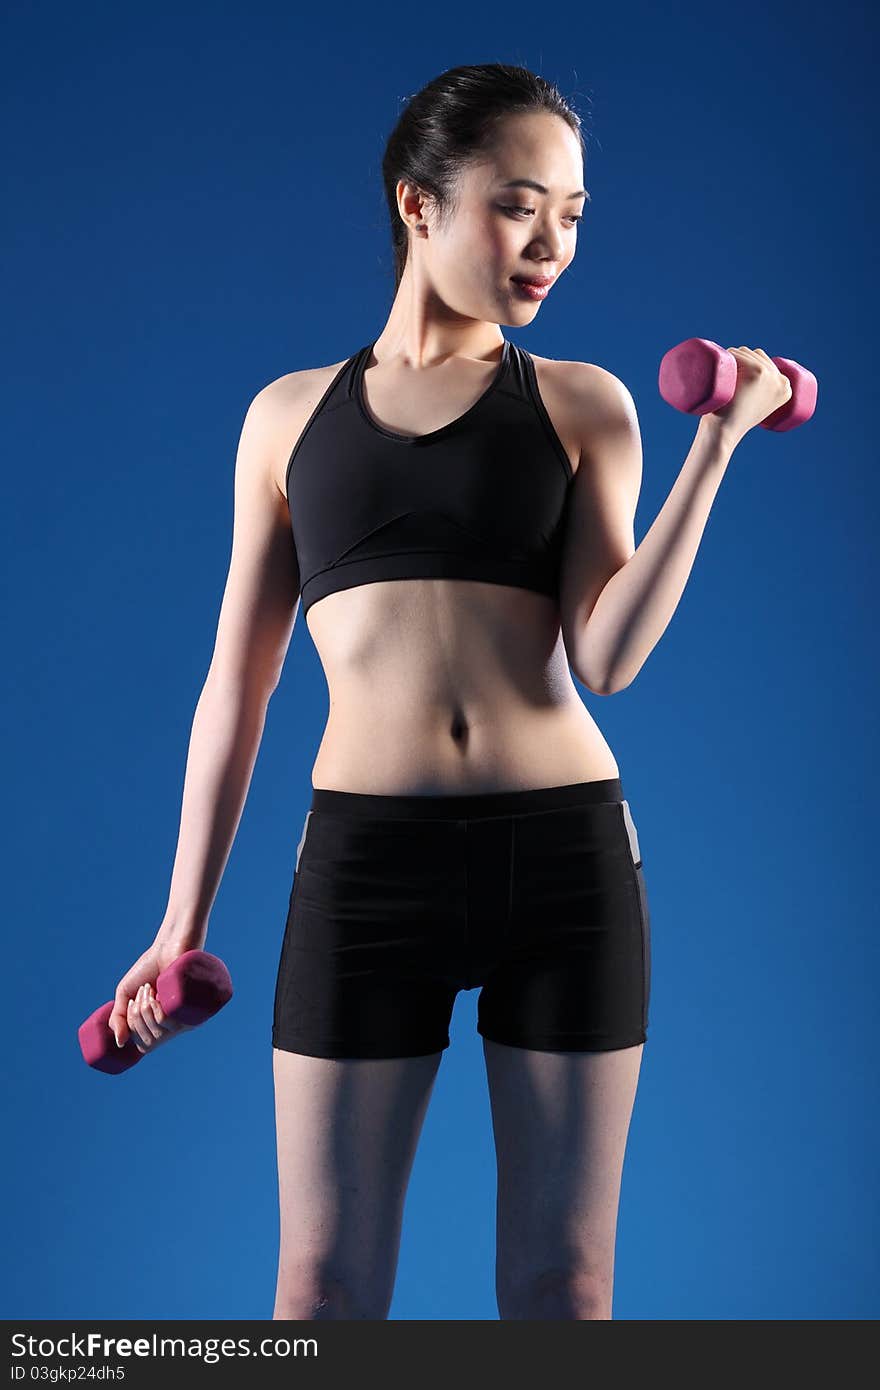 Beautiful young oriental woman working out with fitness hand weights, wearing black sports bra and shorts, standing in blue studio. Beautiful young oriental woman working out with fitness hand weights, wearing black sports bra and shorts, standing in blue studio.